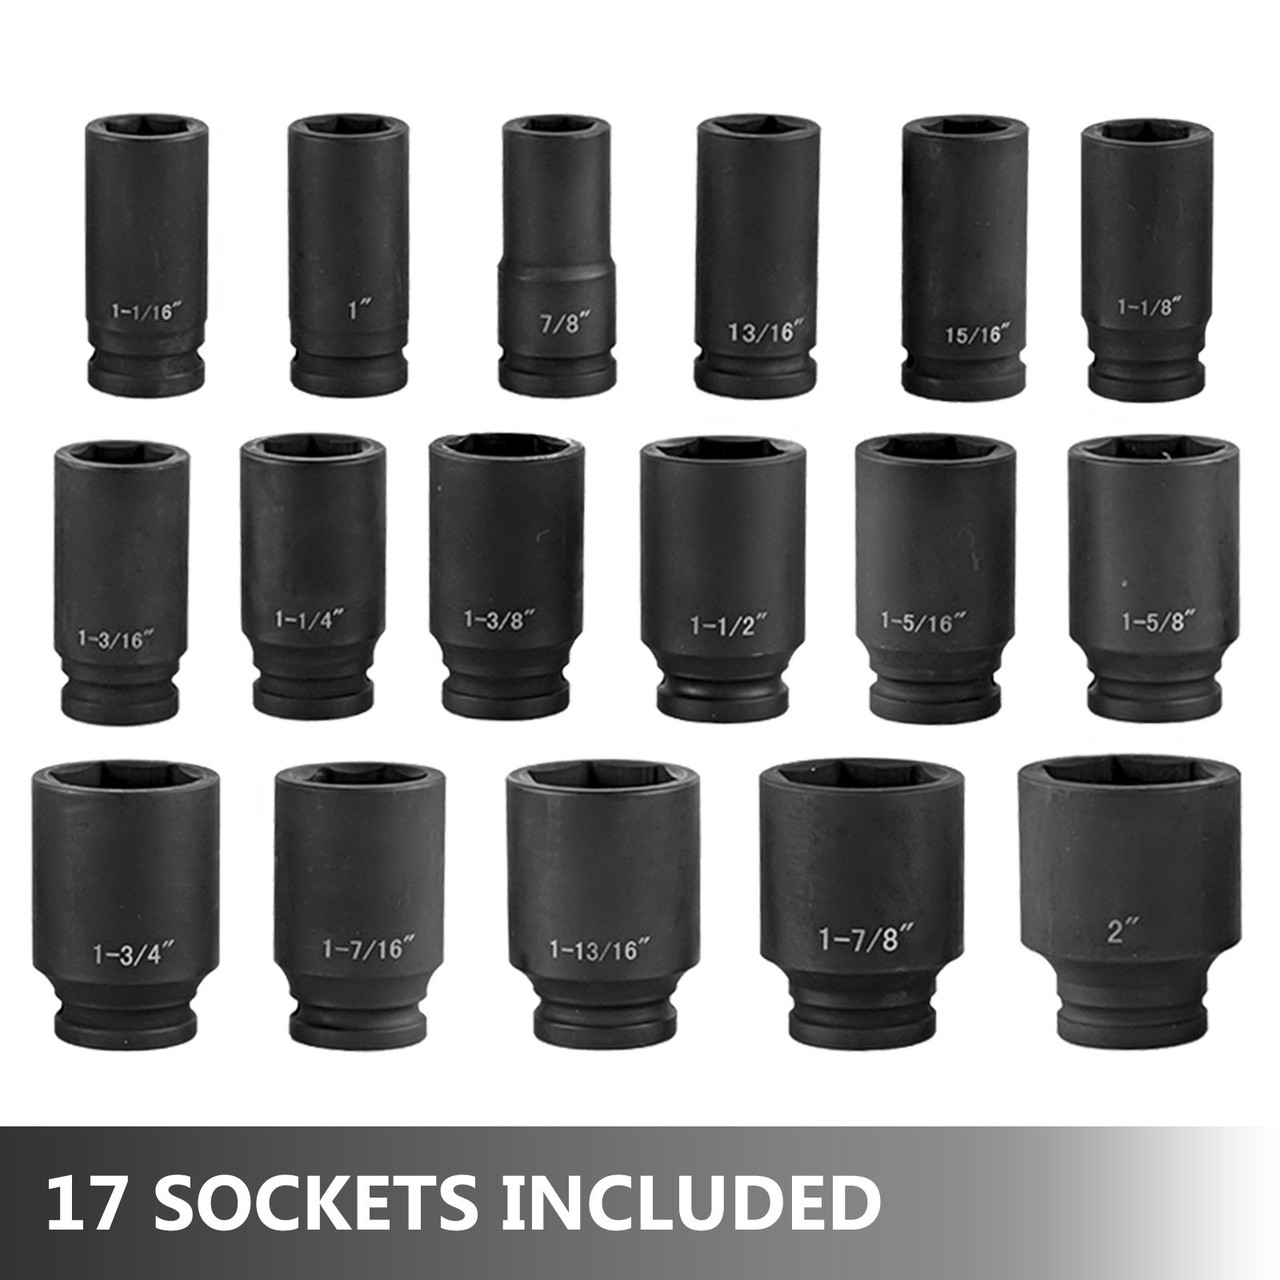 Impact Socket Set 3/4 Inches 22 Piece Deep Impact Sockets, Socket Assortment 3/4 Inches Drive Socket Set Impact Standard SAE Sizes 7/8 Inches to 2 Inches Includes Adapters and Ratchet Handle